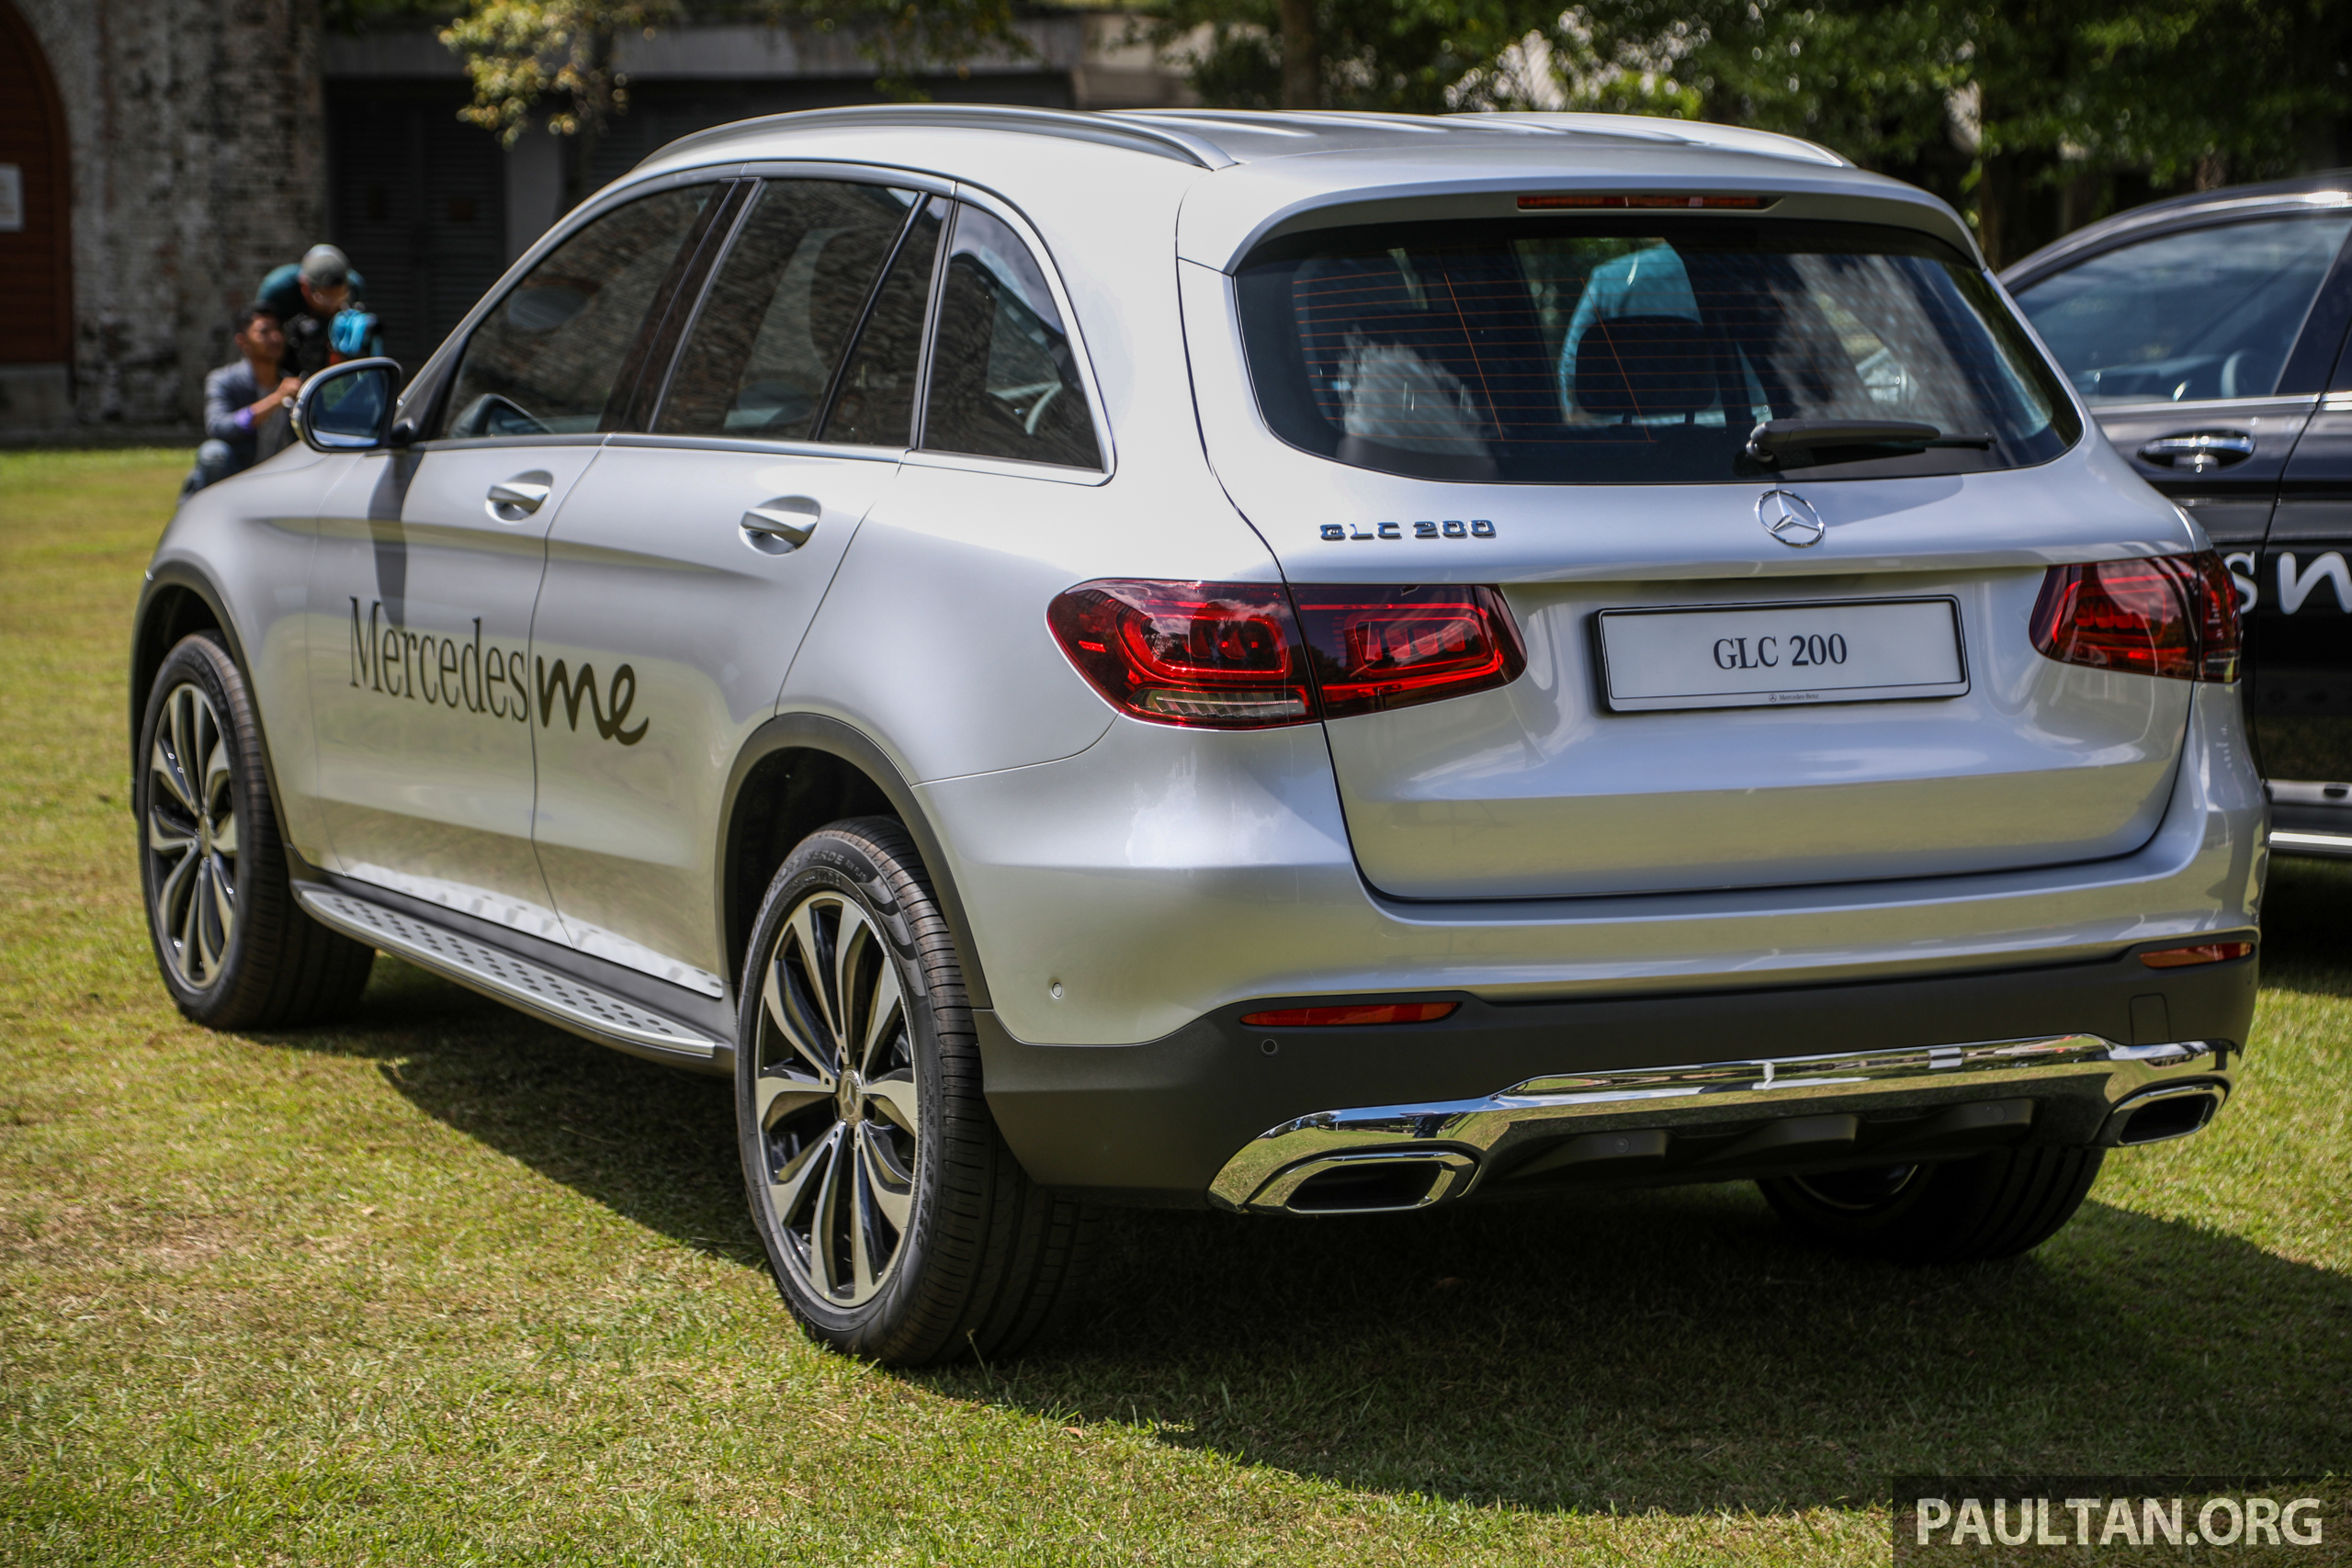 2020 Mercedes-Benz GLC facelift in Malaysia - GLC200 and GLC300 with ...